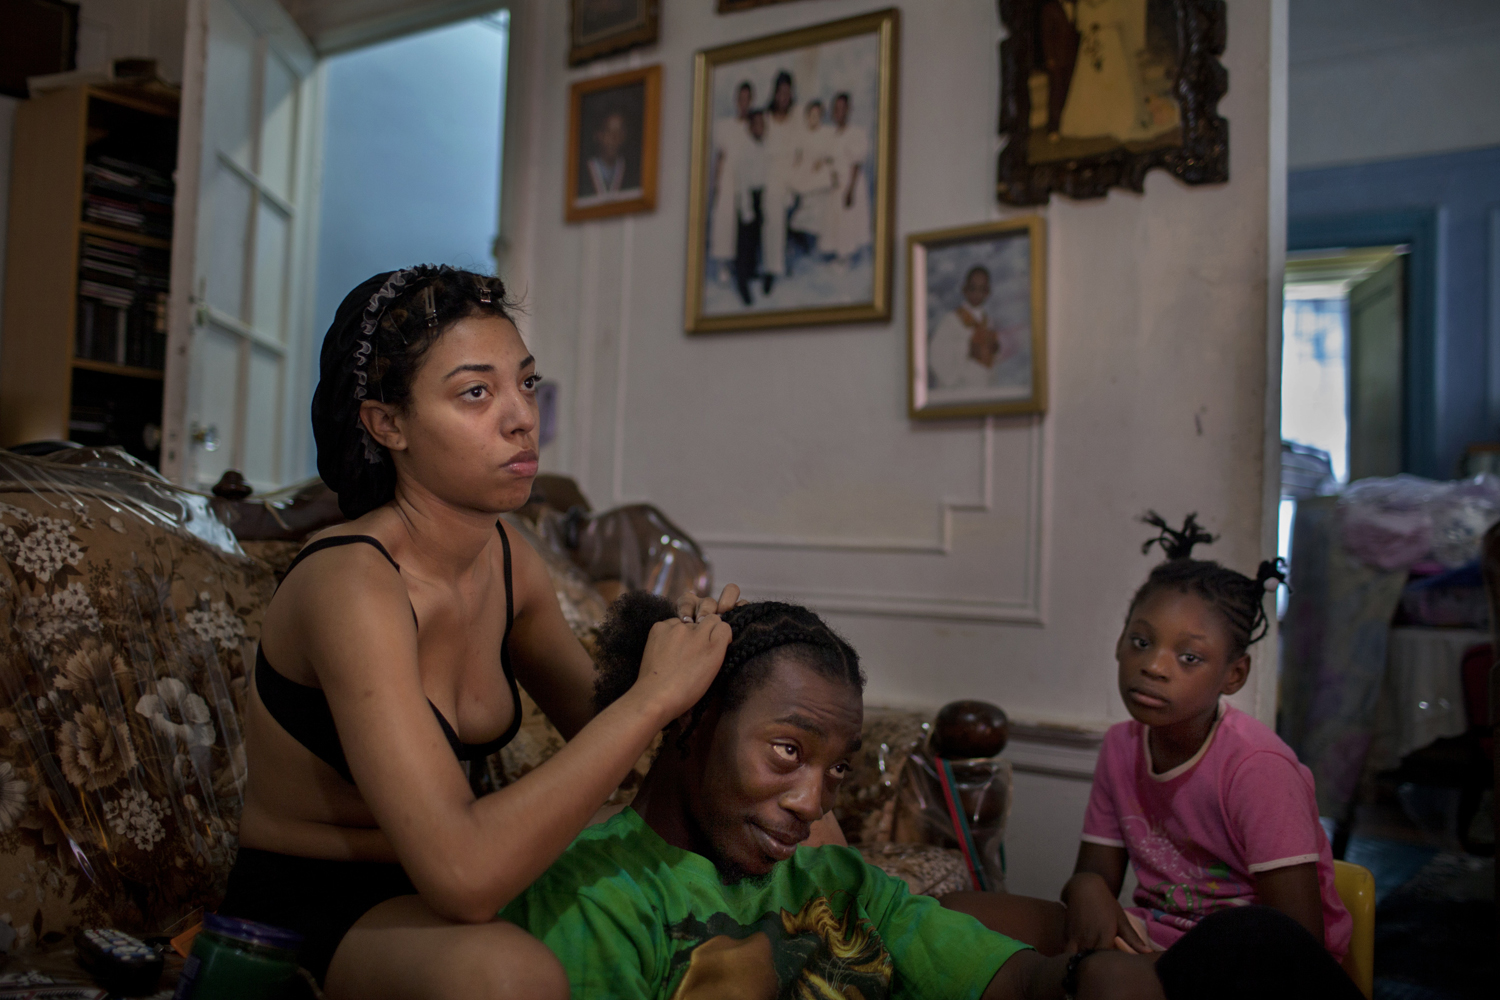 August 8, 2013. East Flatbush, Brooklyn. Sarah braids her brother's hair in their mother's home as her niece looks on.